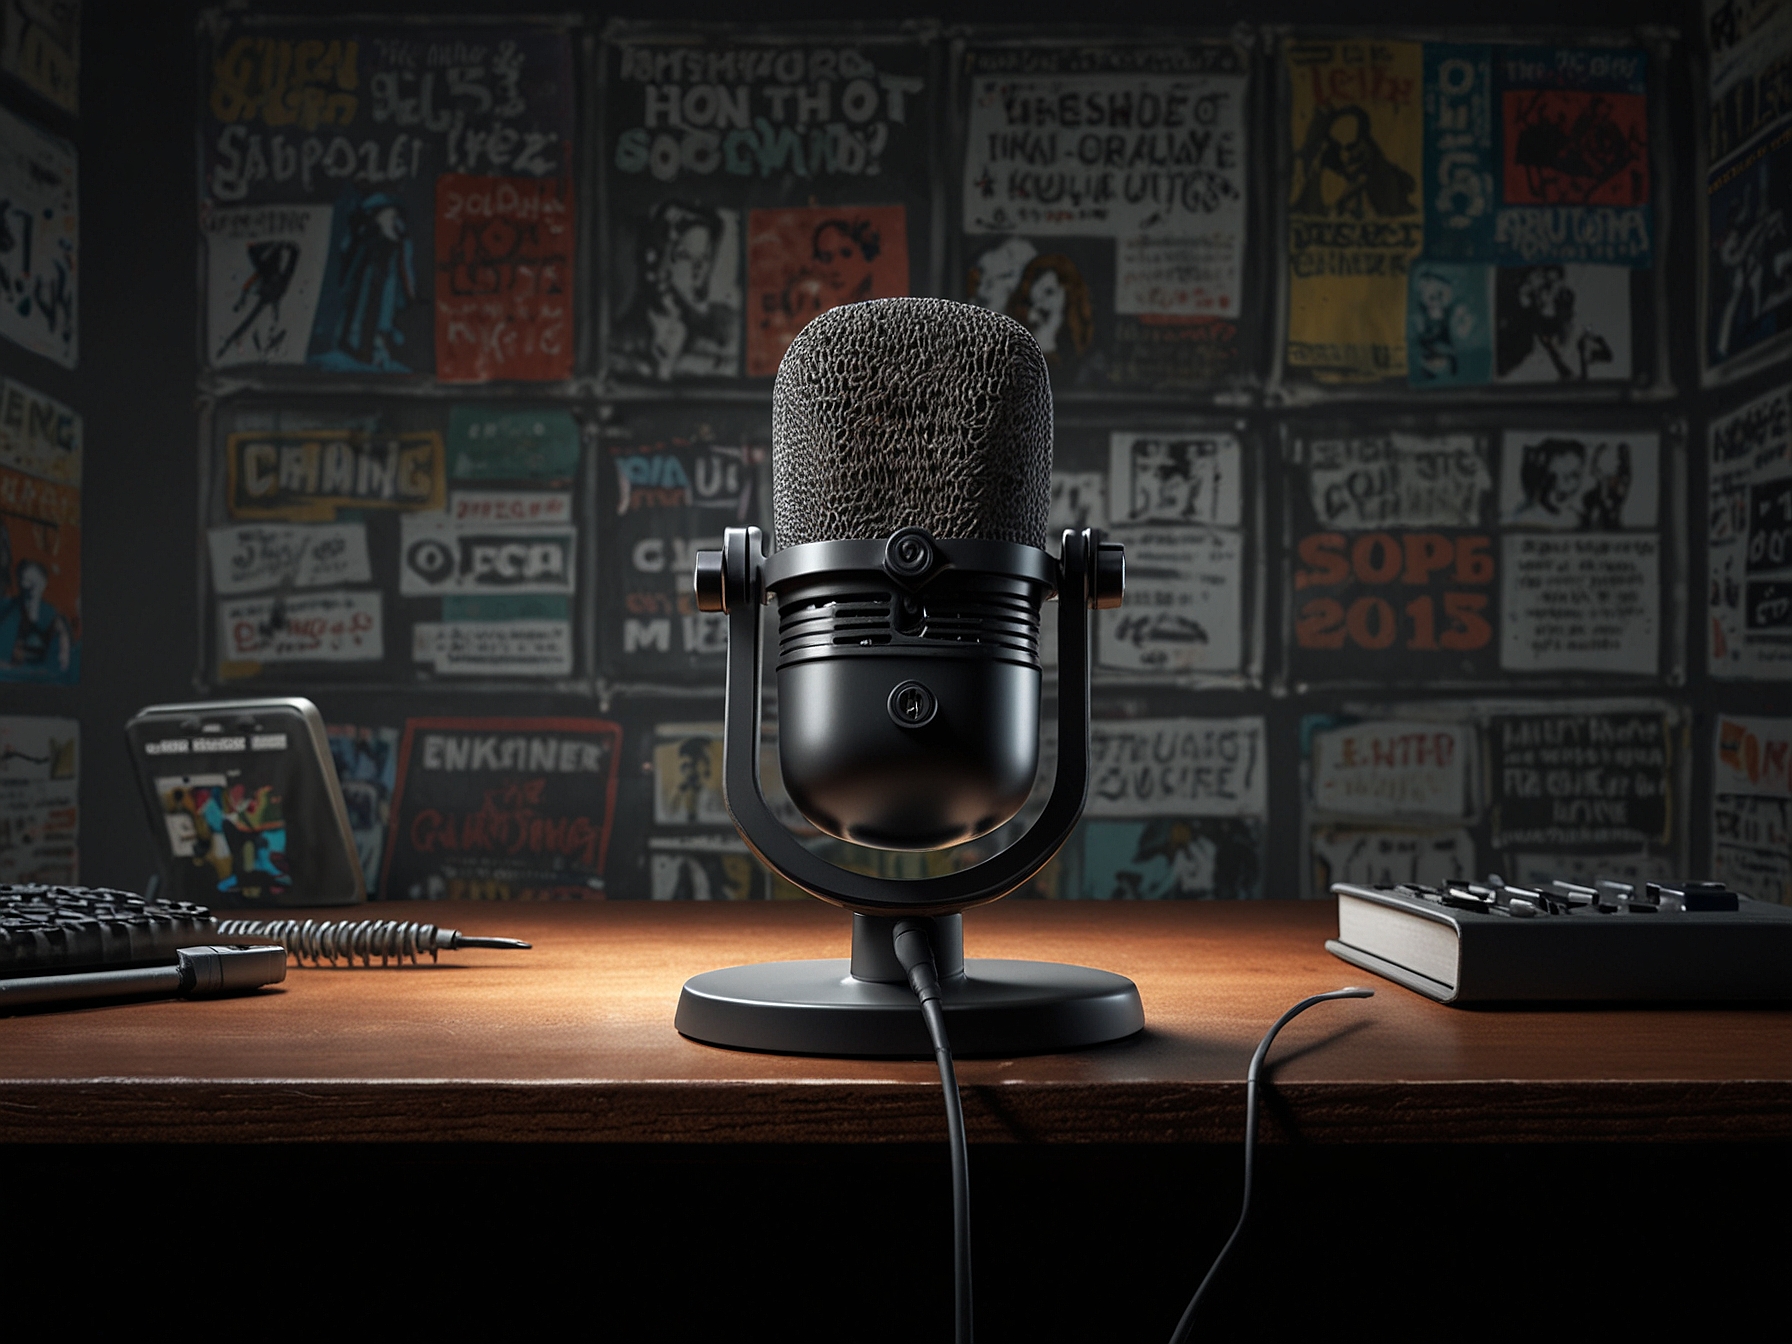 A podcast setup, with microphones and headphones, highlighting Slate's use of multimedia storytelling through popular podcasts like 'Trumpcast' and 'The Gist' to reach a broader audience.